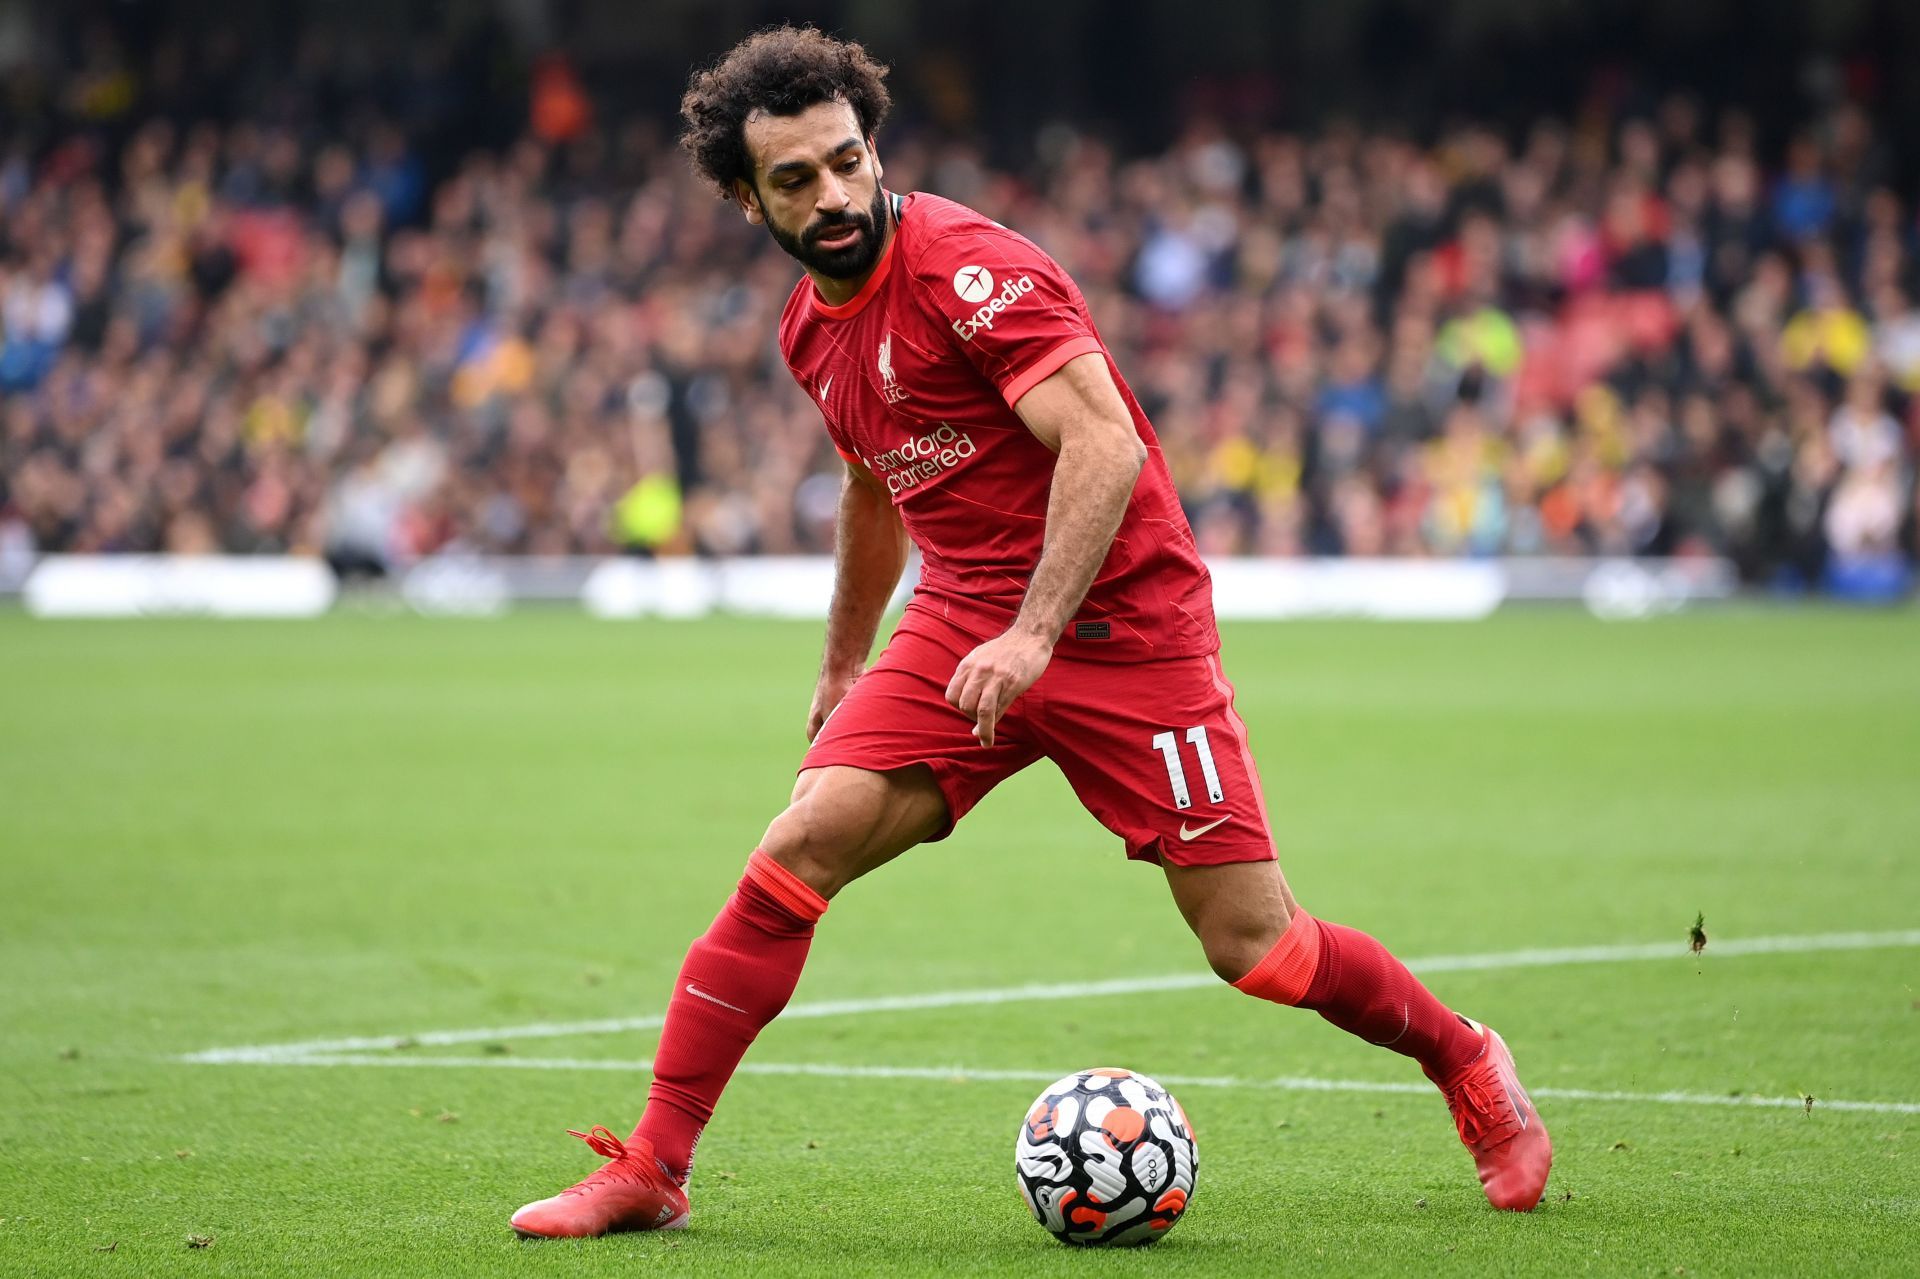 Salah became the first Premier League opposition player to score a hat-trick at Old Trafford